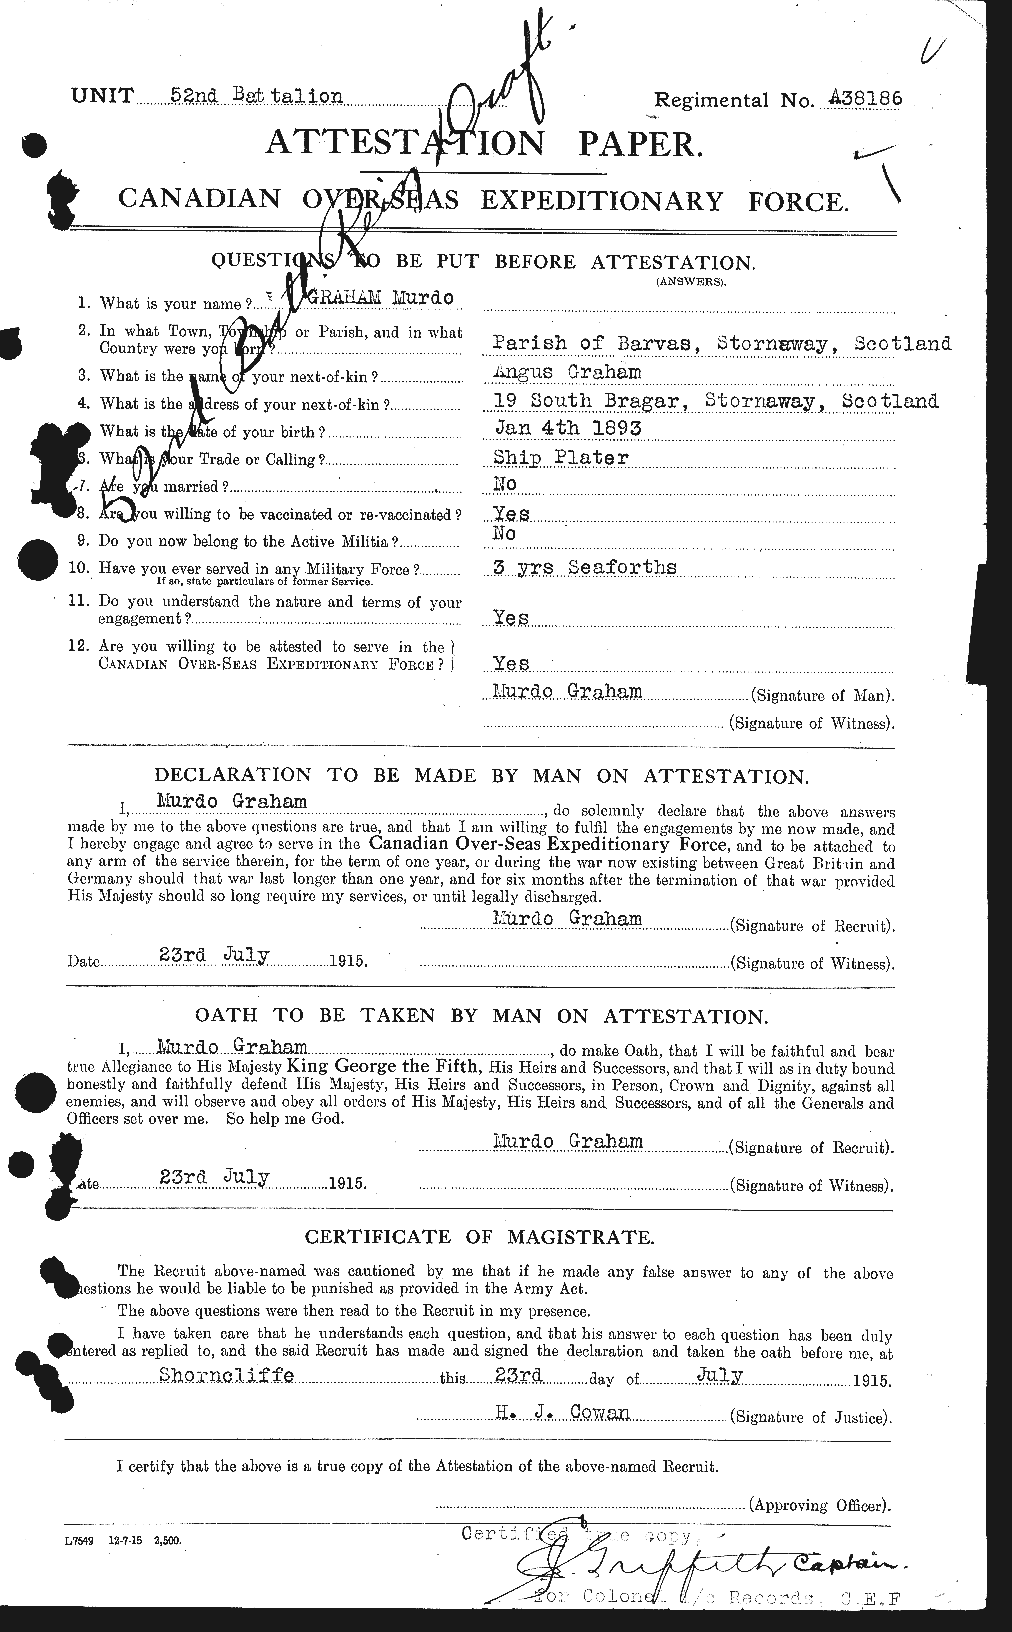 Personnel Records of the First World War - CEF 359314a